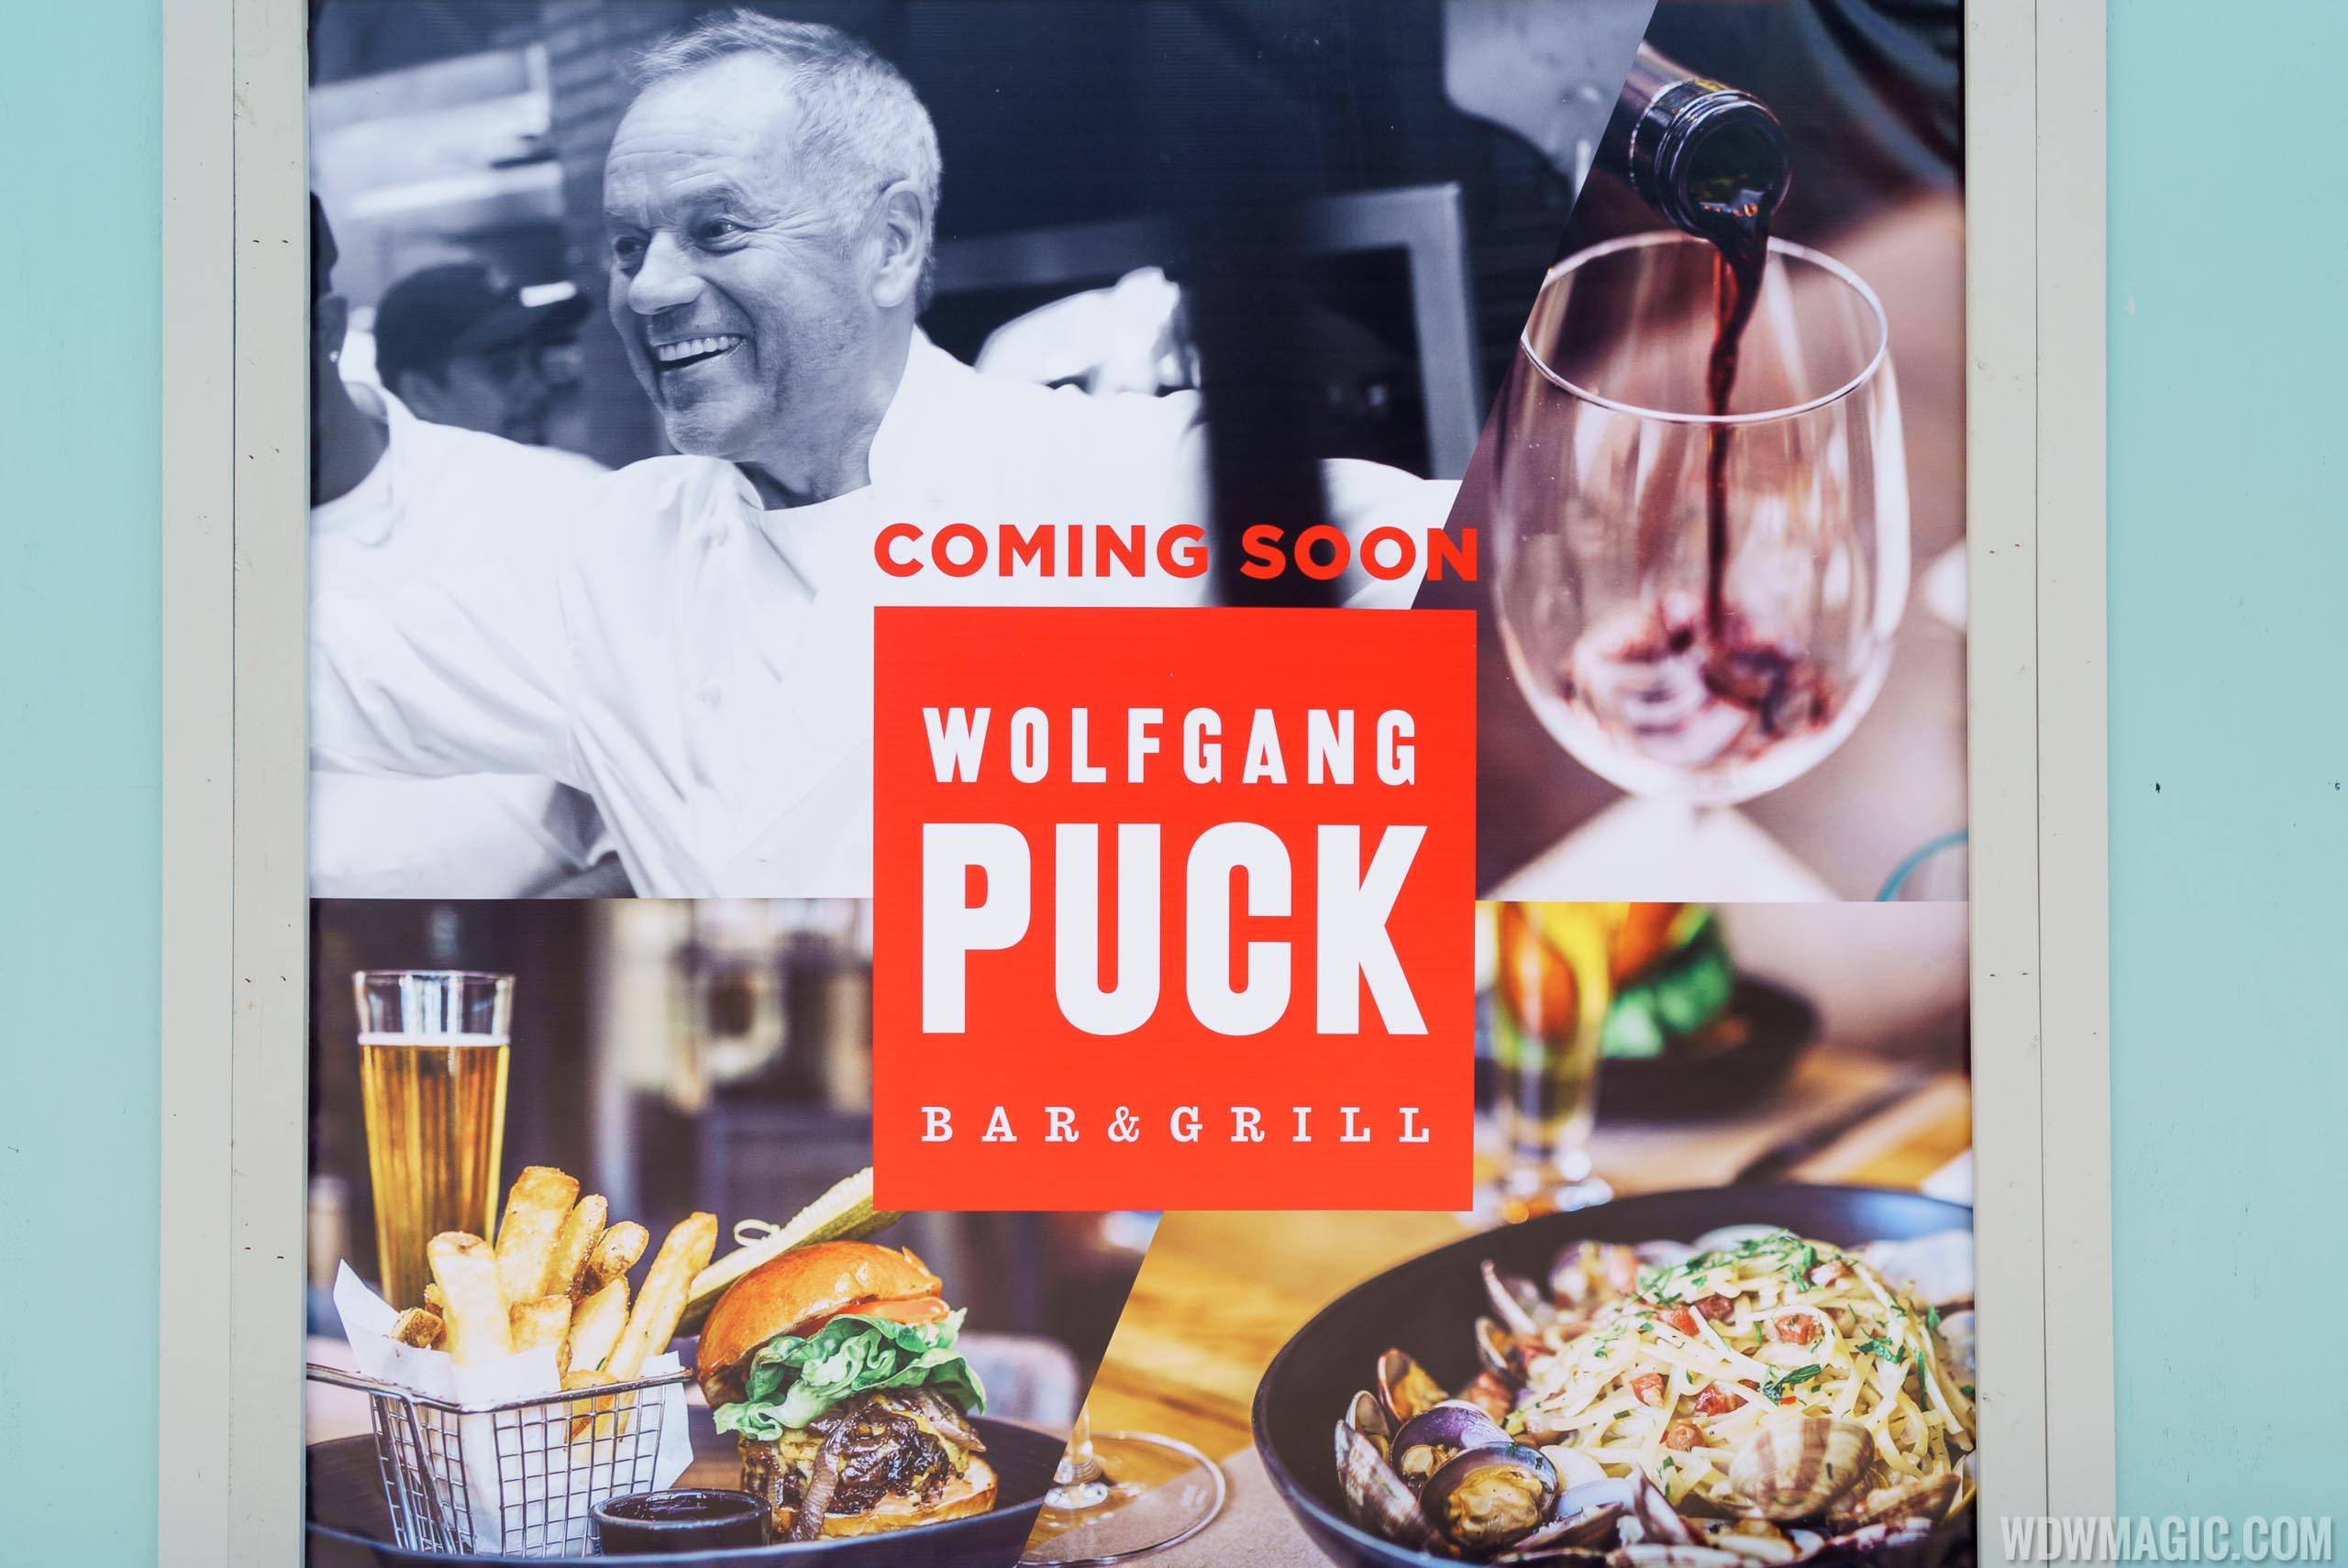 Wolfgang Puck Bar and Grill concept art